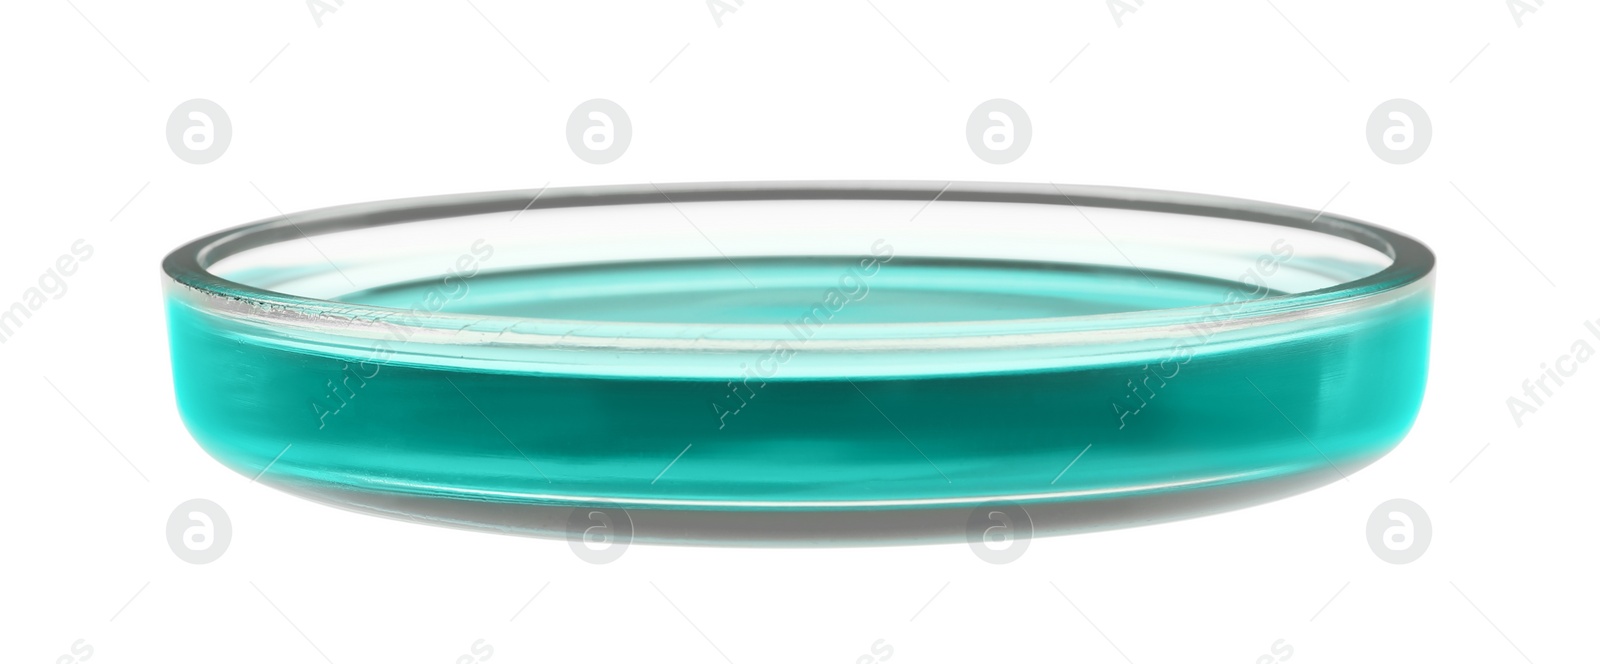 Photo of Petri dish with turquoise liquid isolated on white